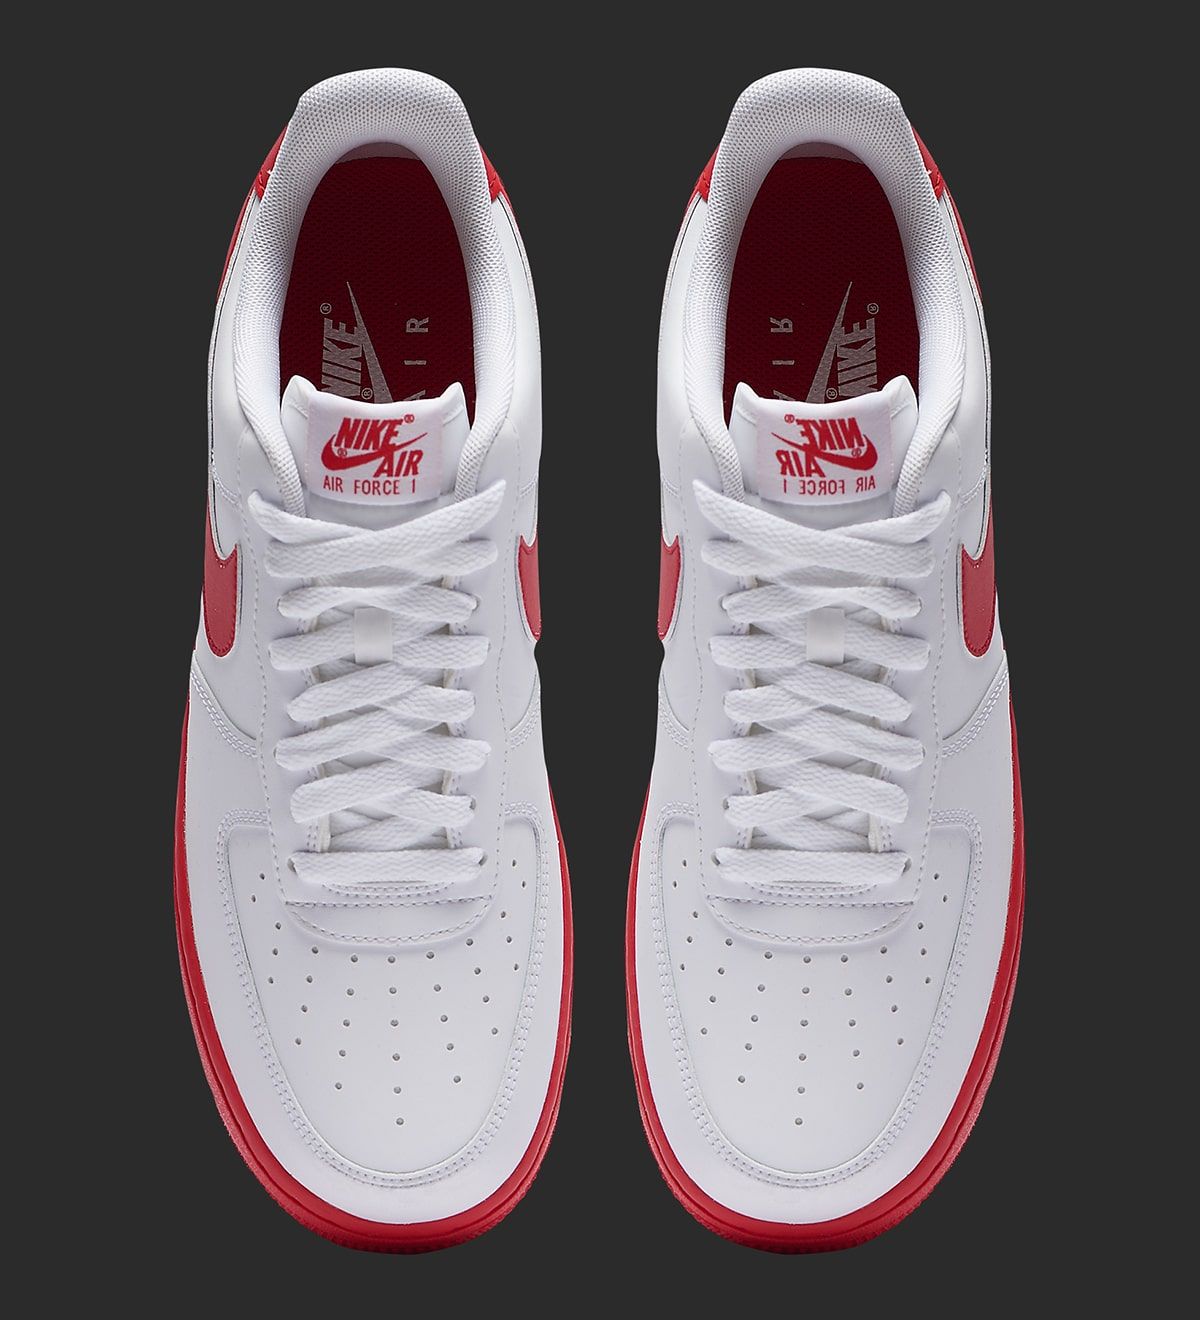 Red-Soled Air Force 1 Lows Just Dropped 